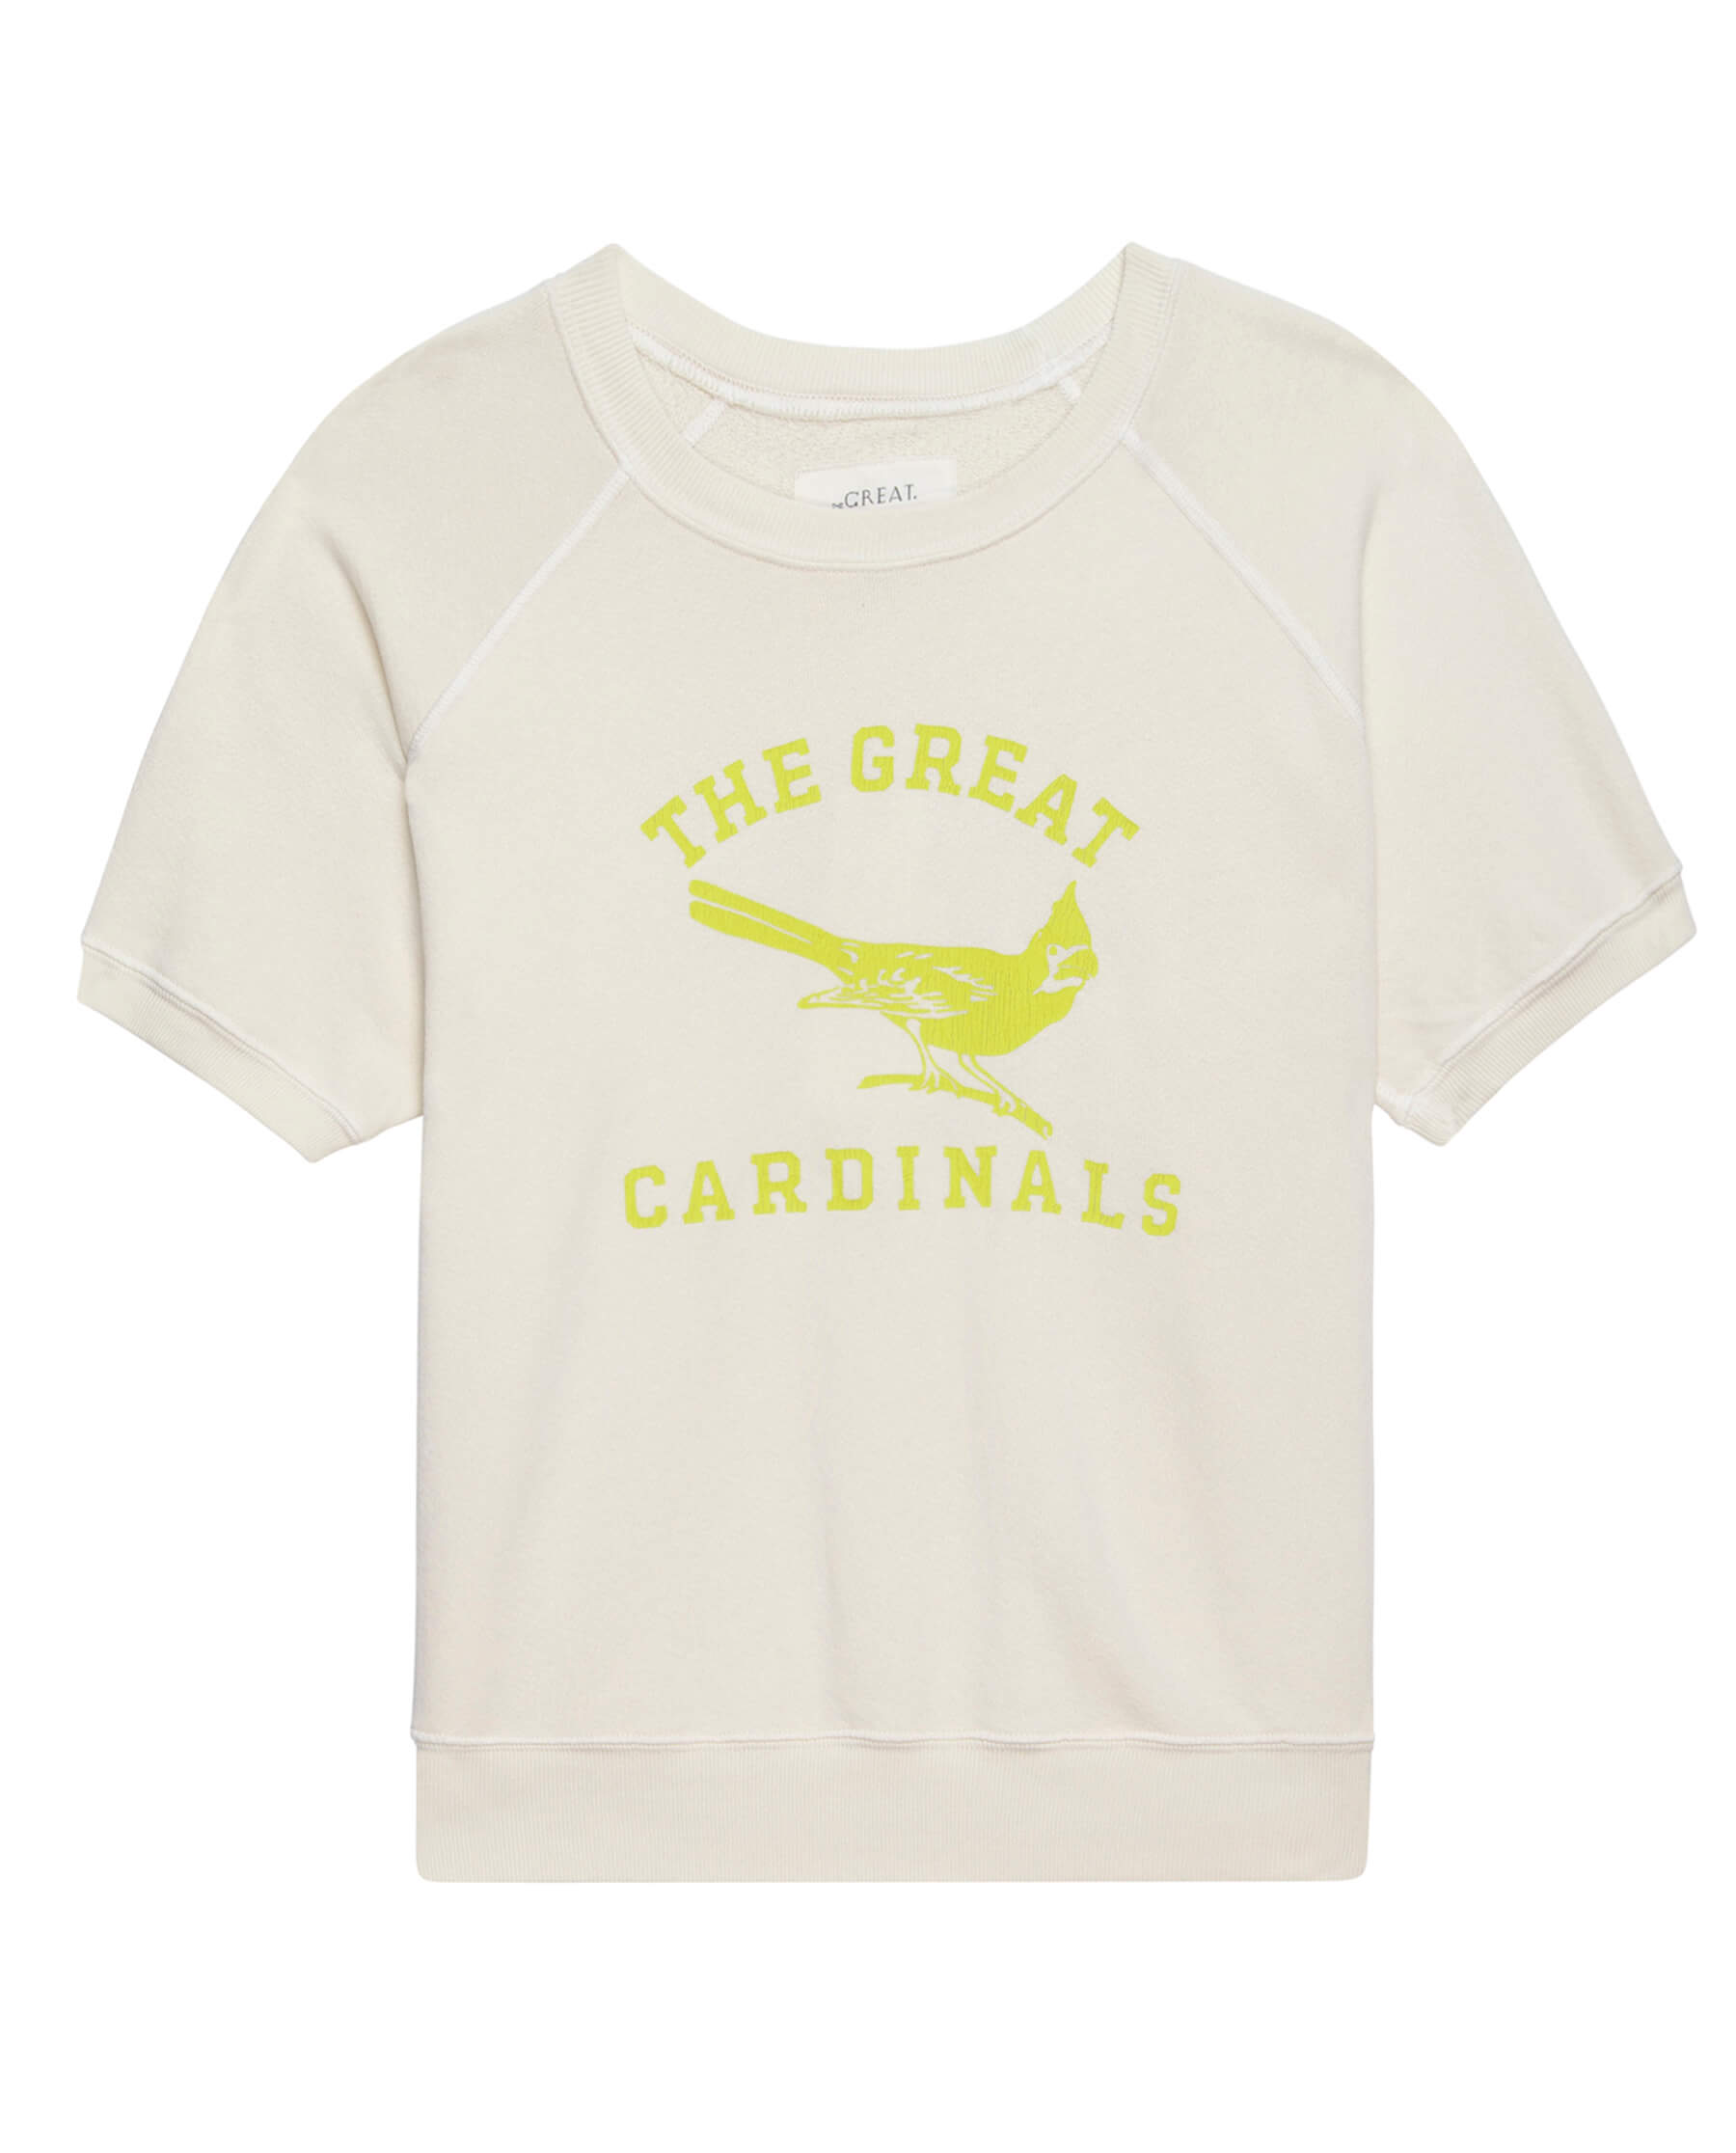 The Short Sleeve Sweatshirt. Graphic -- Washed White with Perched Cardinal Graphic SWEATSHIRTS THE GREAT. SP24 D2